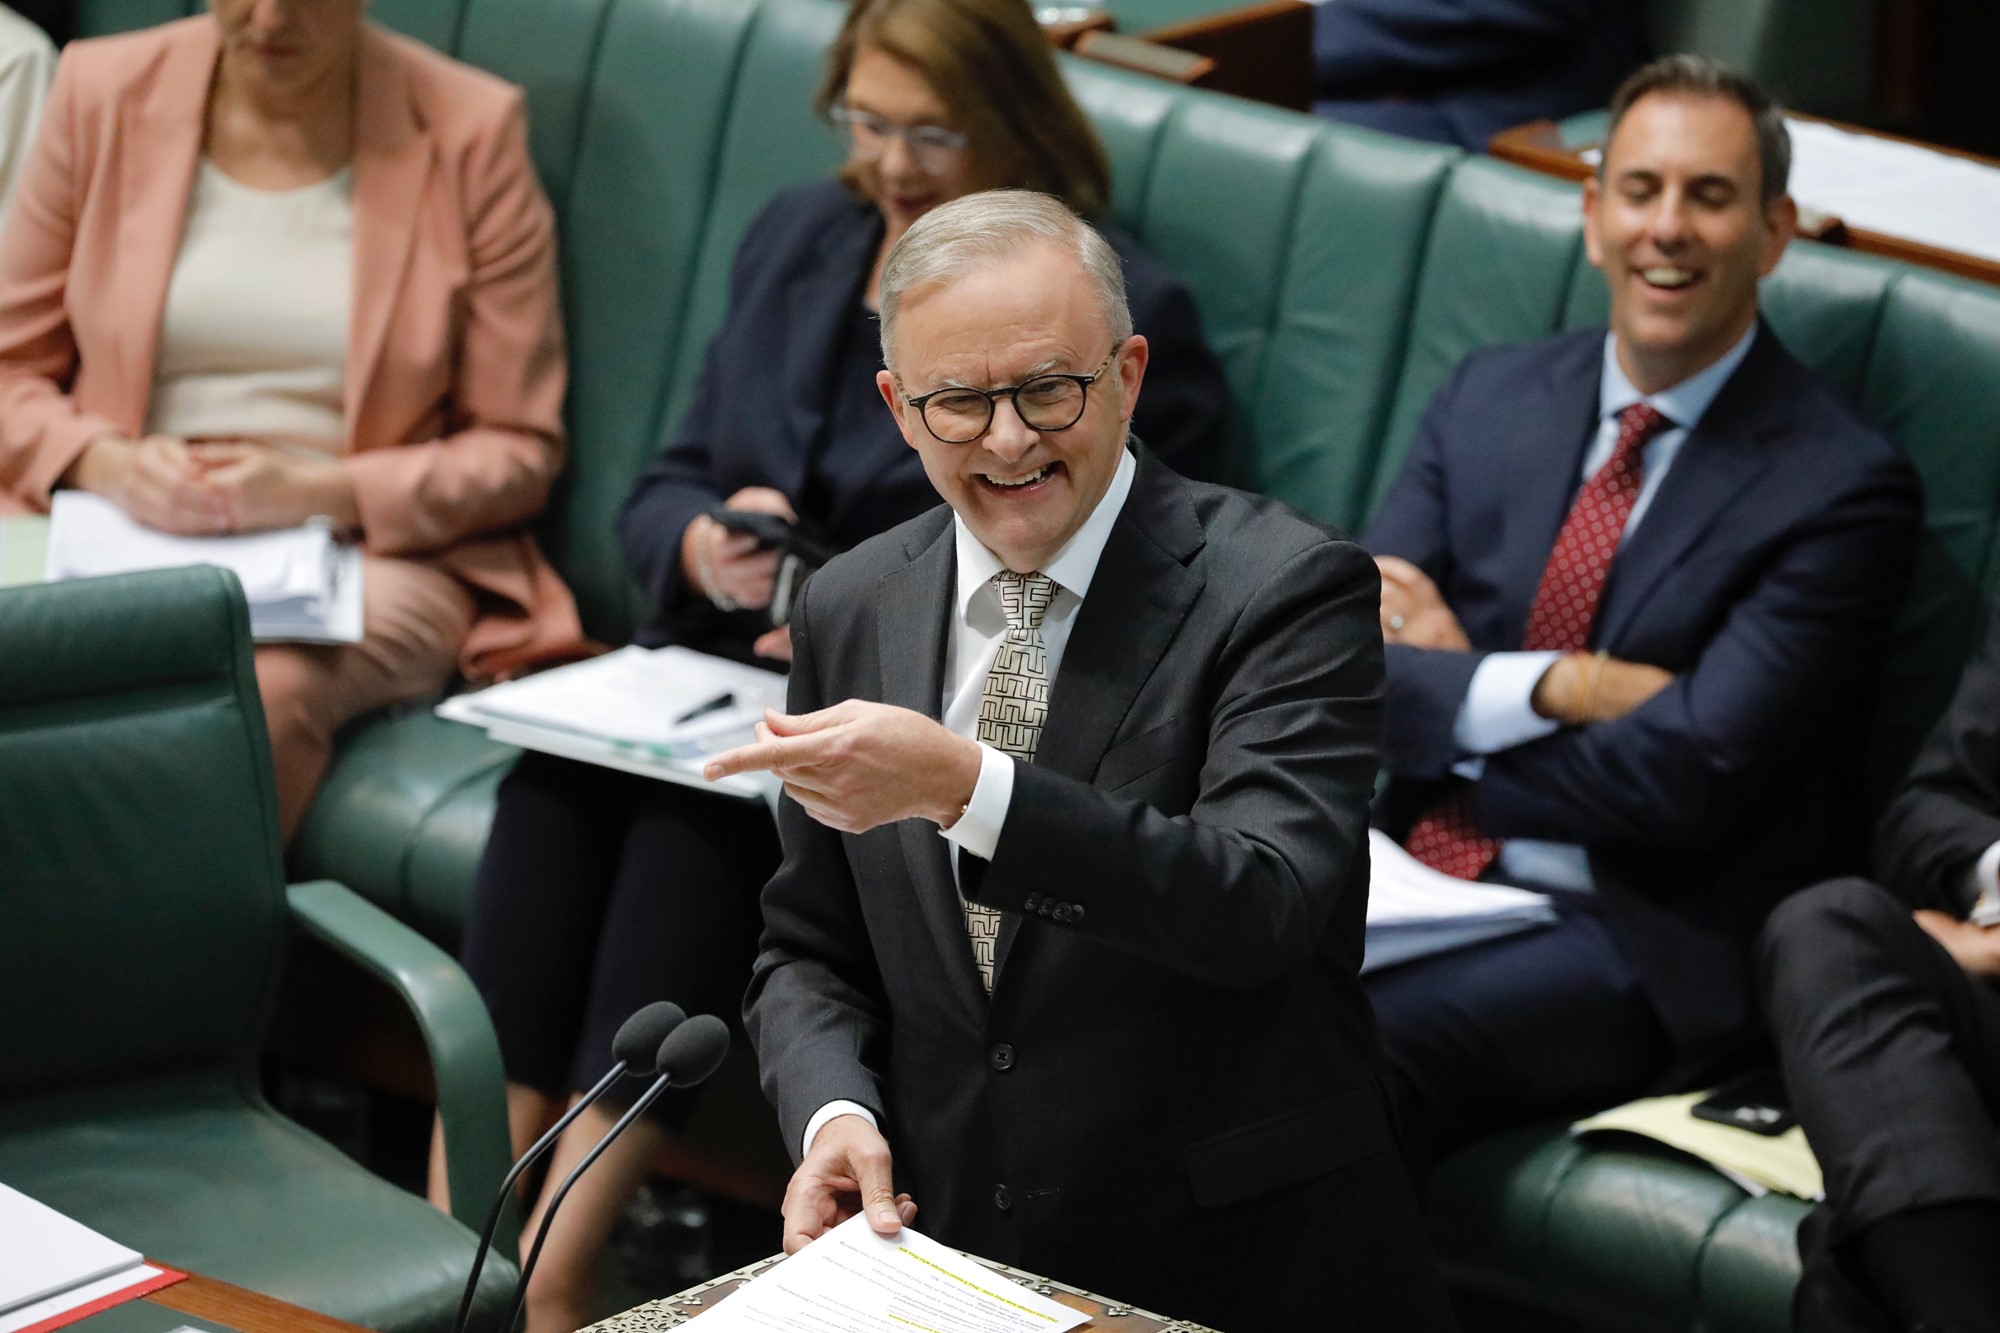 A man in a suit, tie and glasses smiles and points in parliament